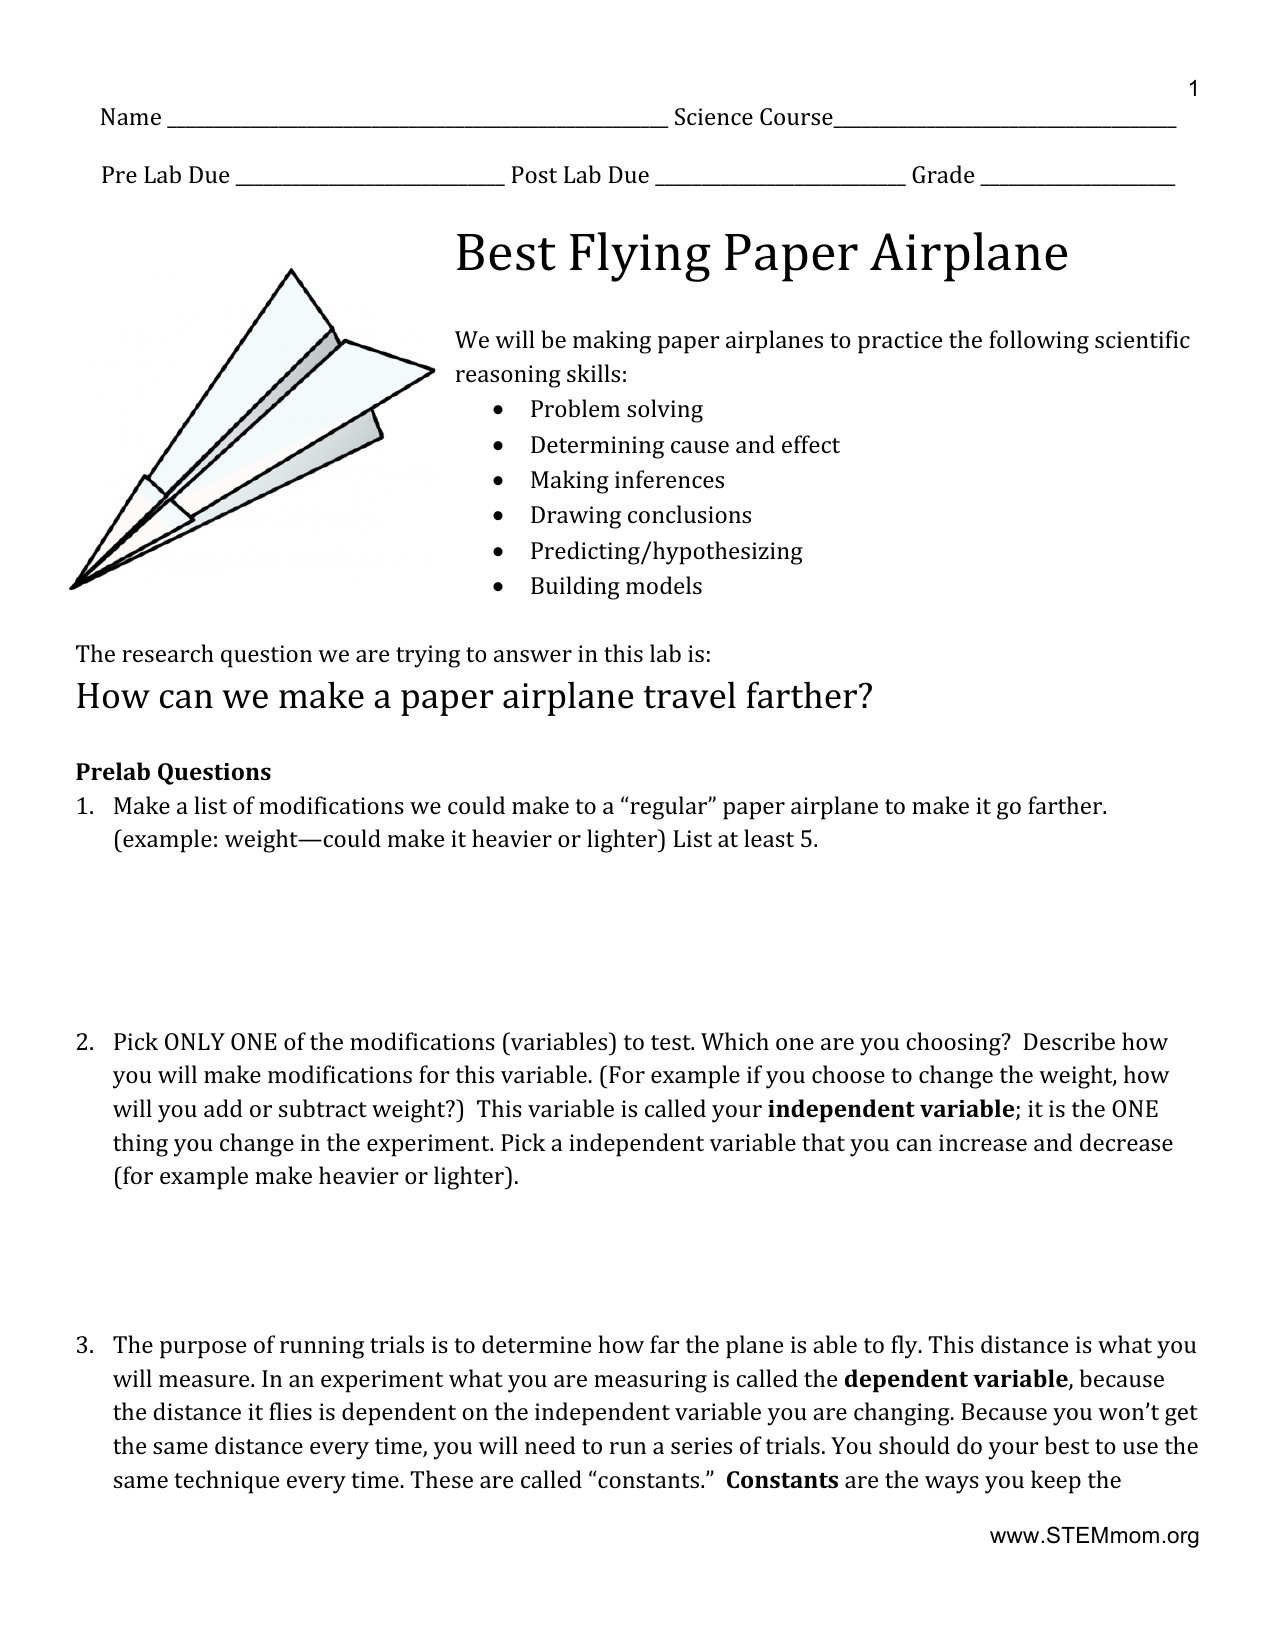 a research paper about airplane